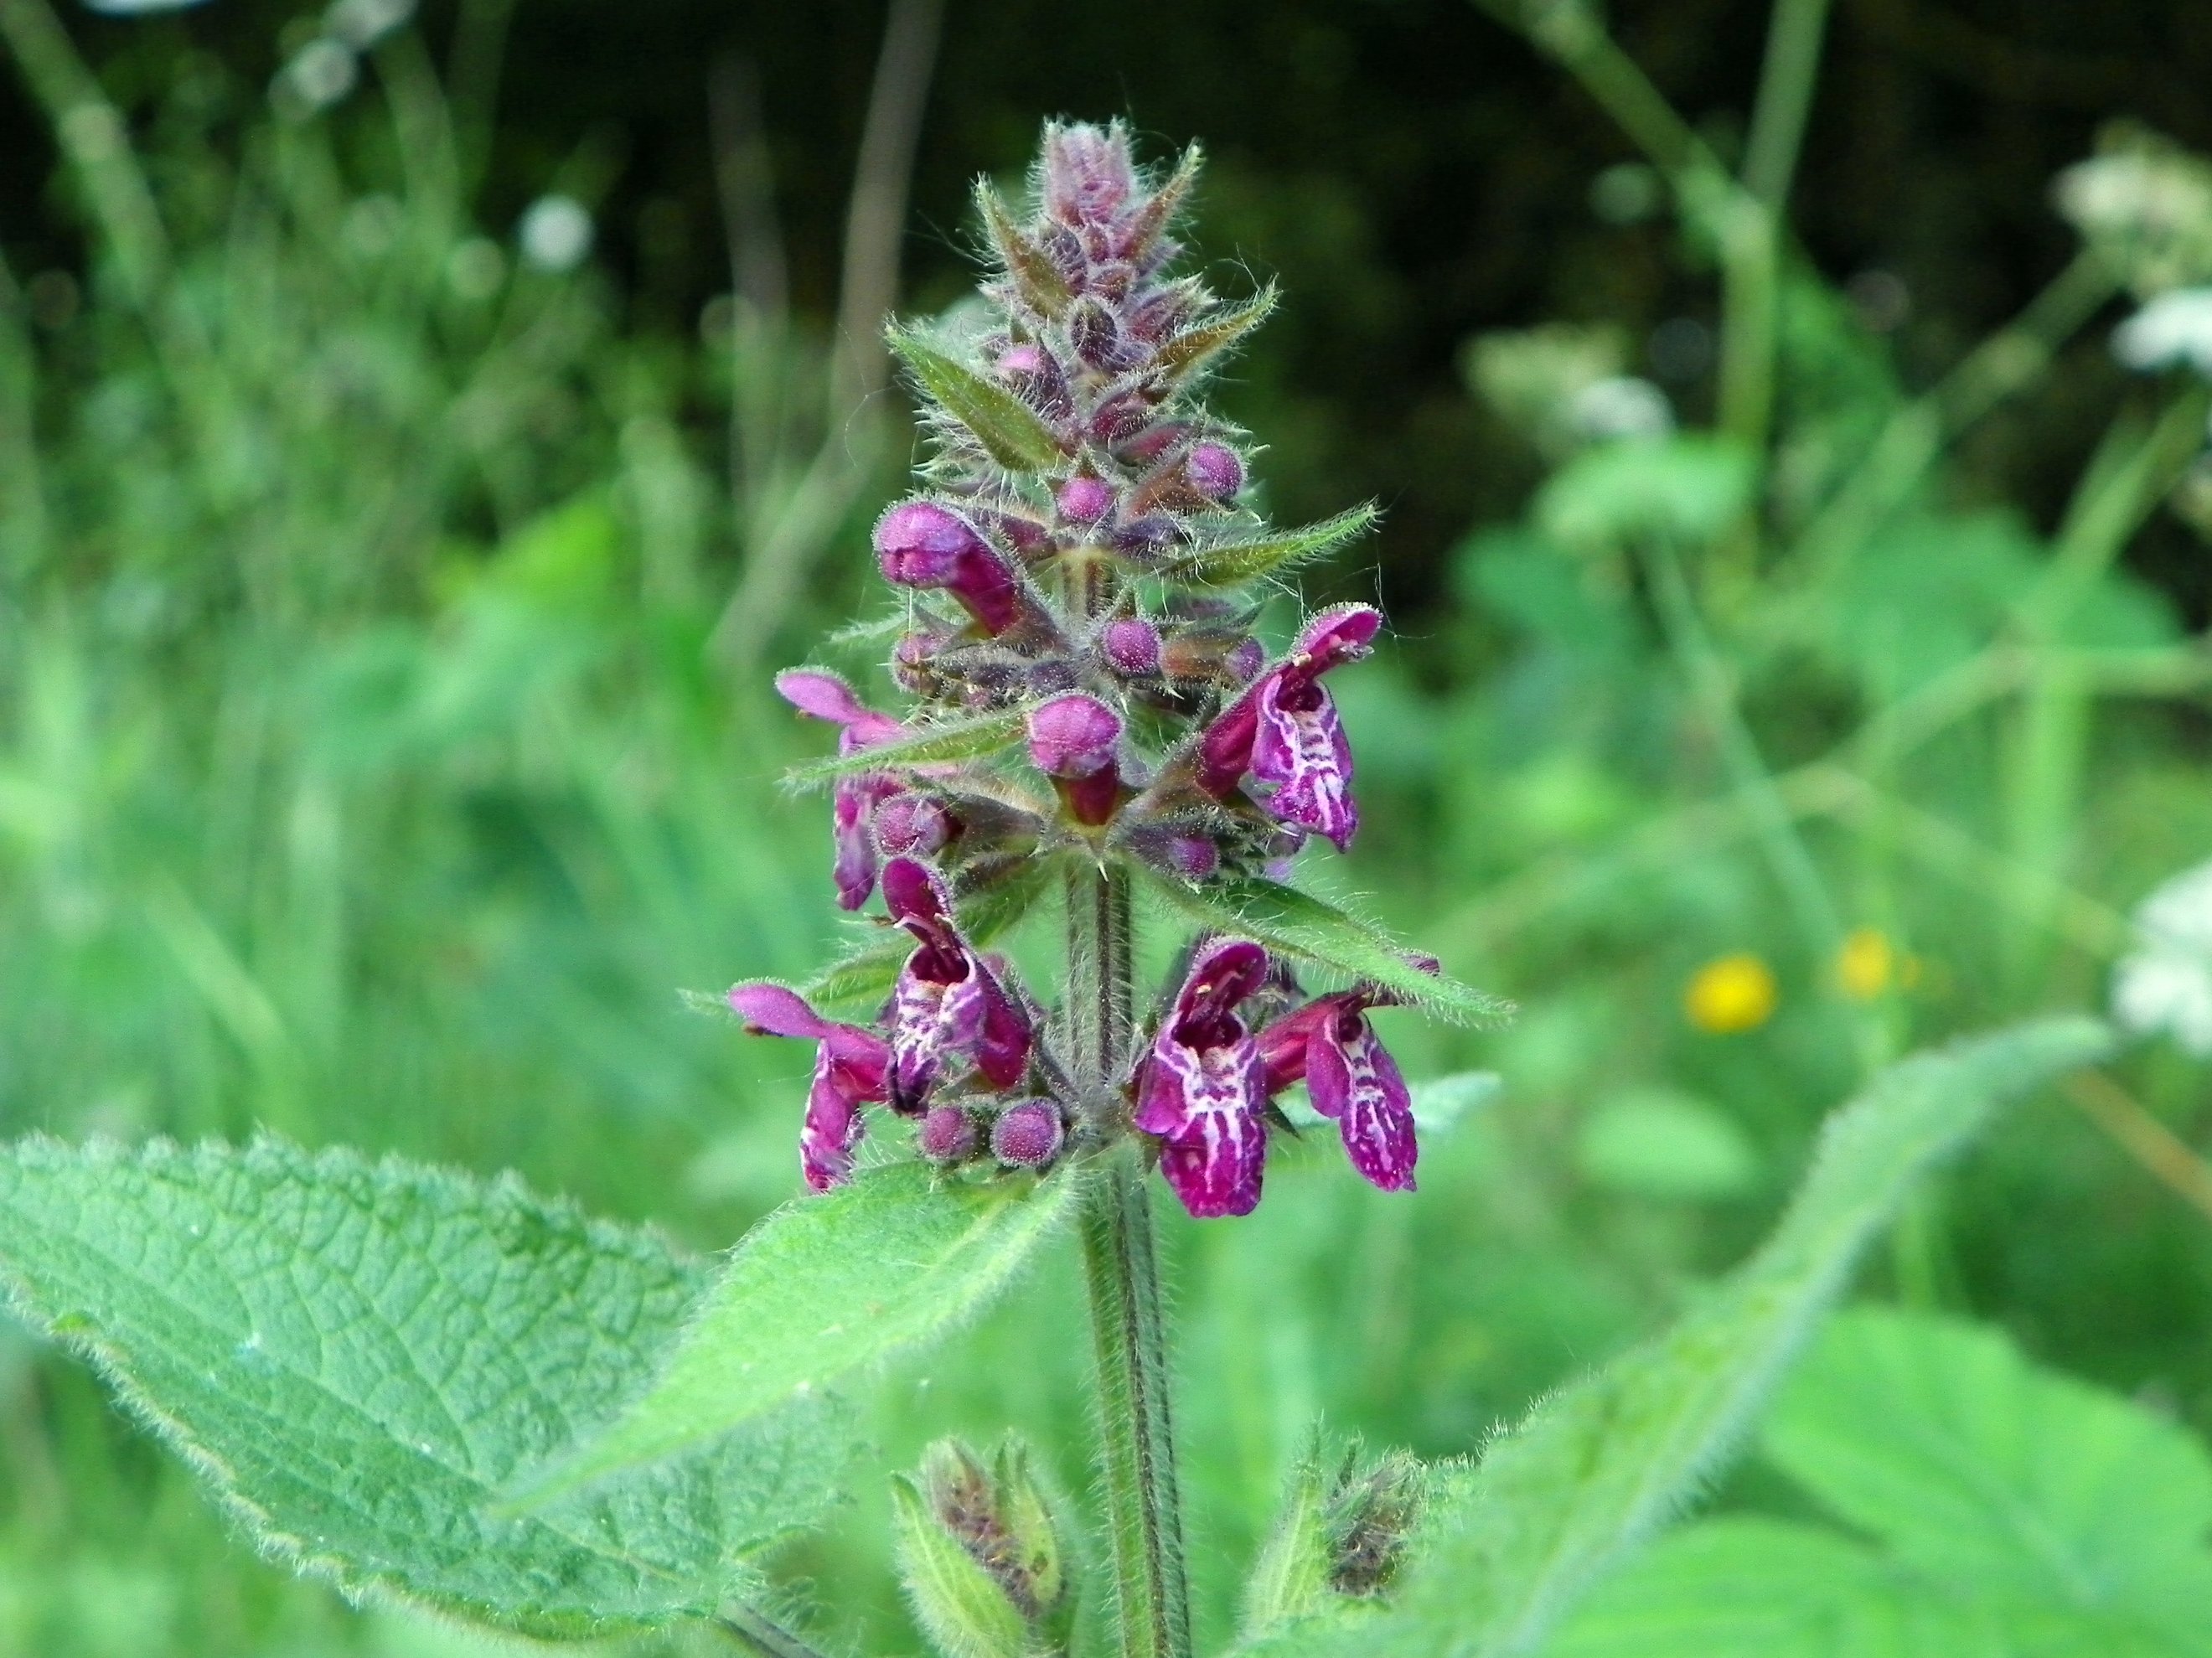 File:Hedge Woundwort (Stachys sylvatica).jpg - Wikimedia Commons